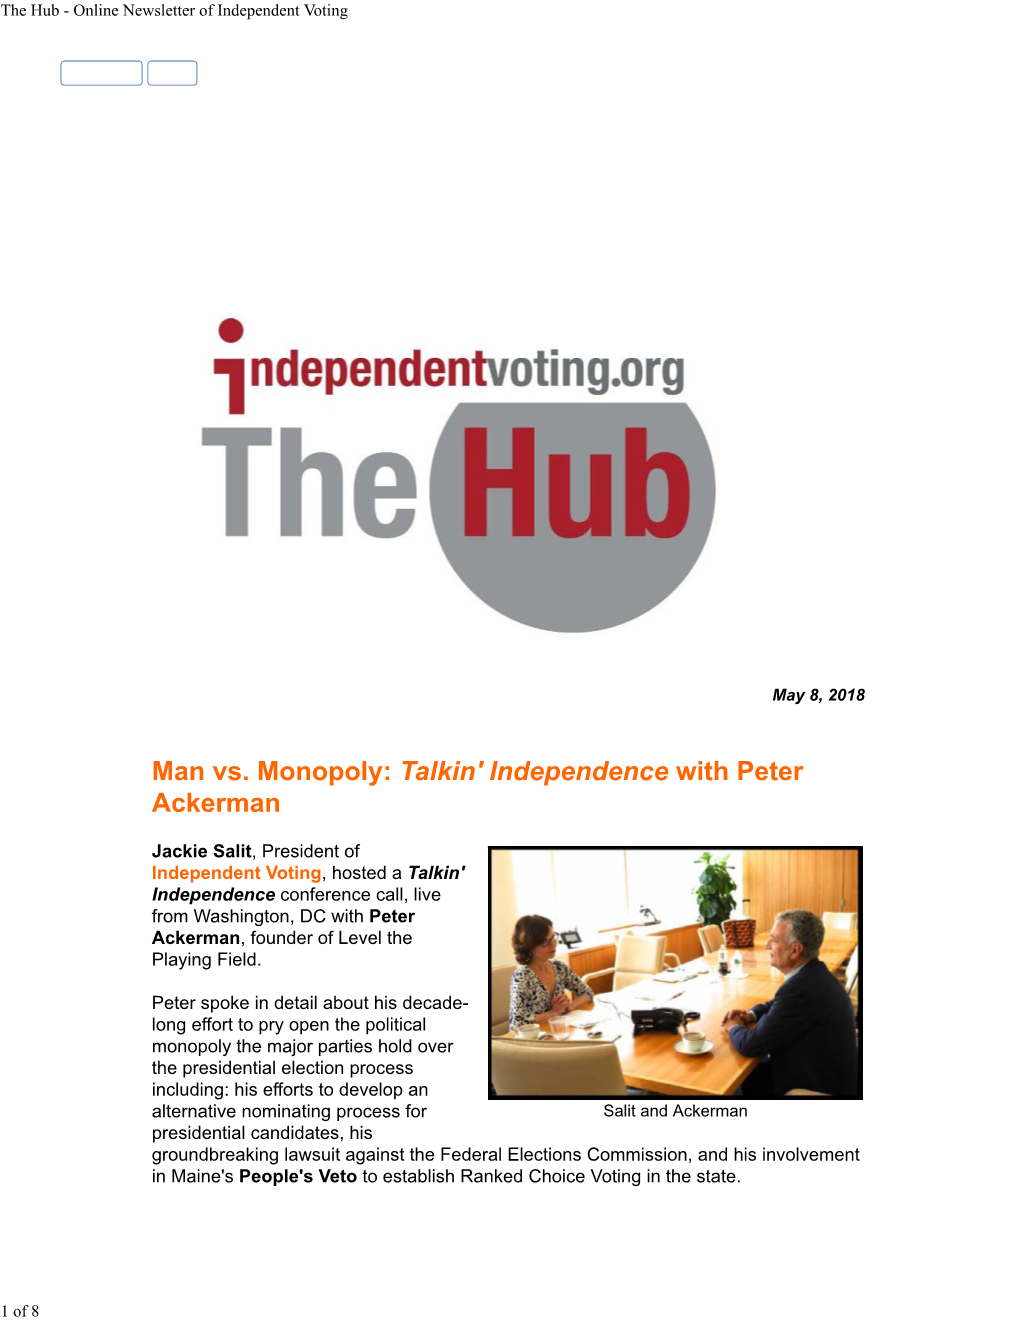 The Hub - Online Newsletter of Independent Voting